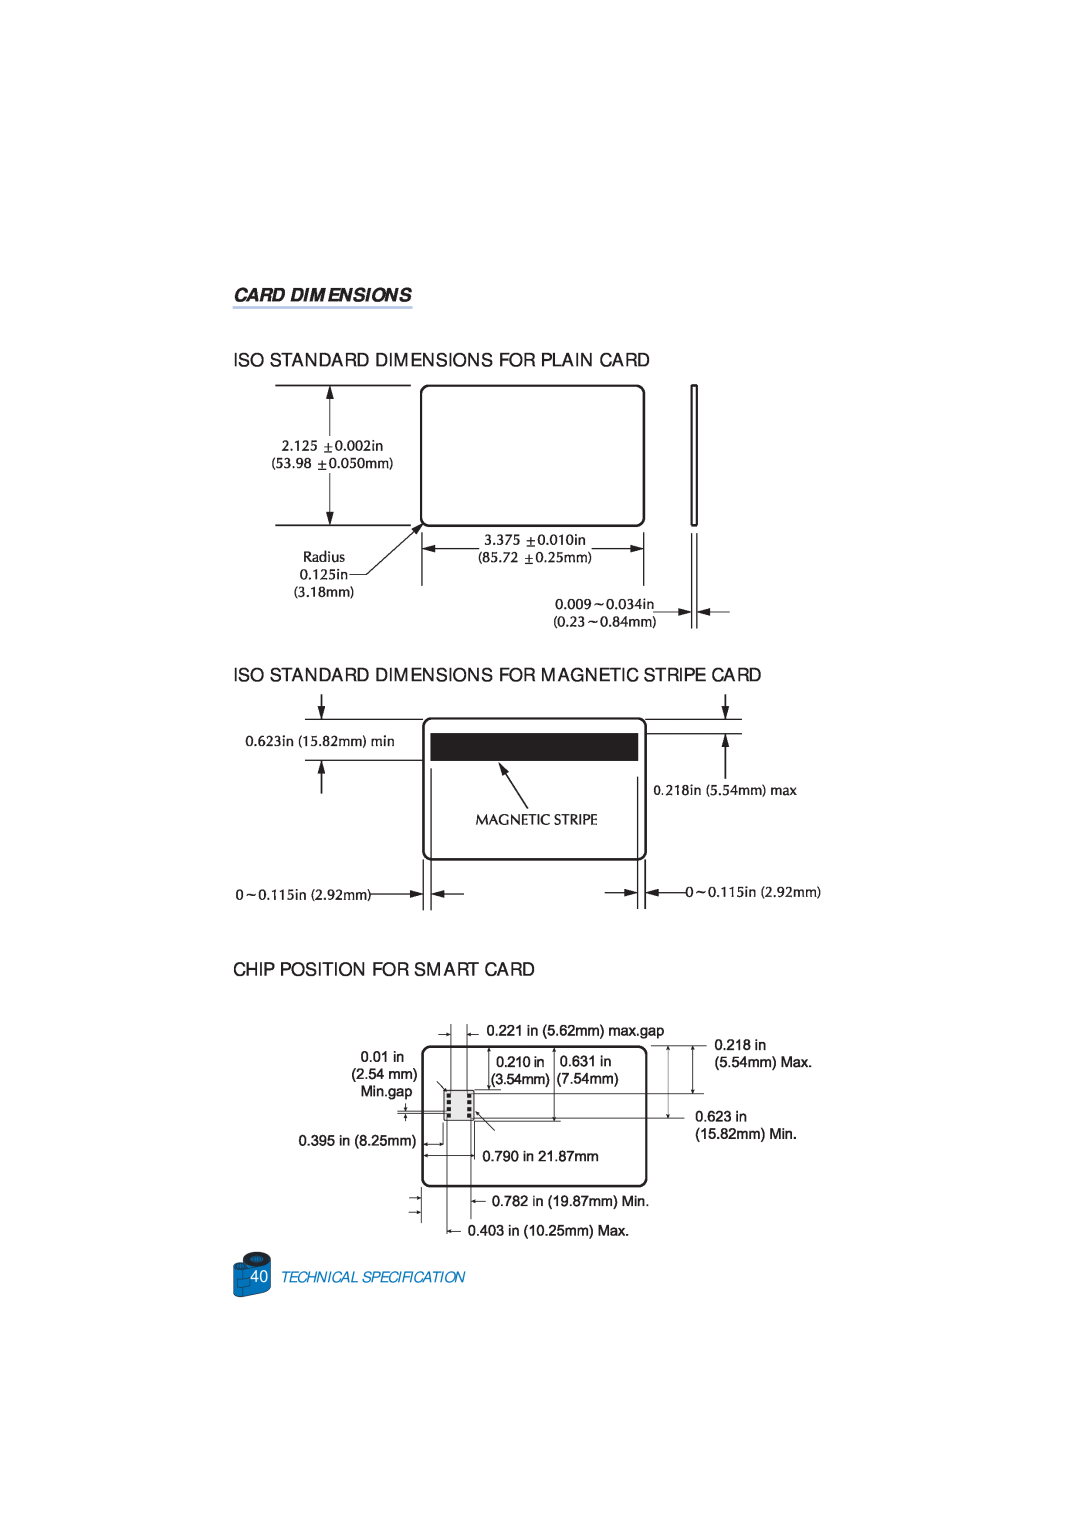 Zebra Technologies P520 user manual Card Dimensions, Technical Specification, Iso Standard Dimensions For Plain Card 